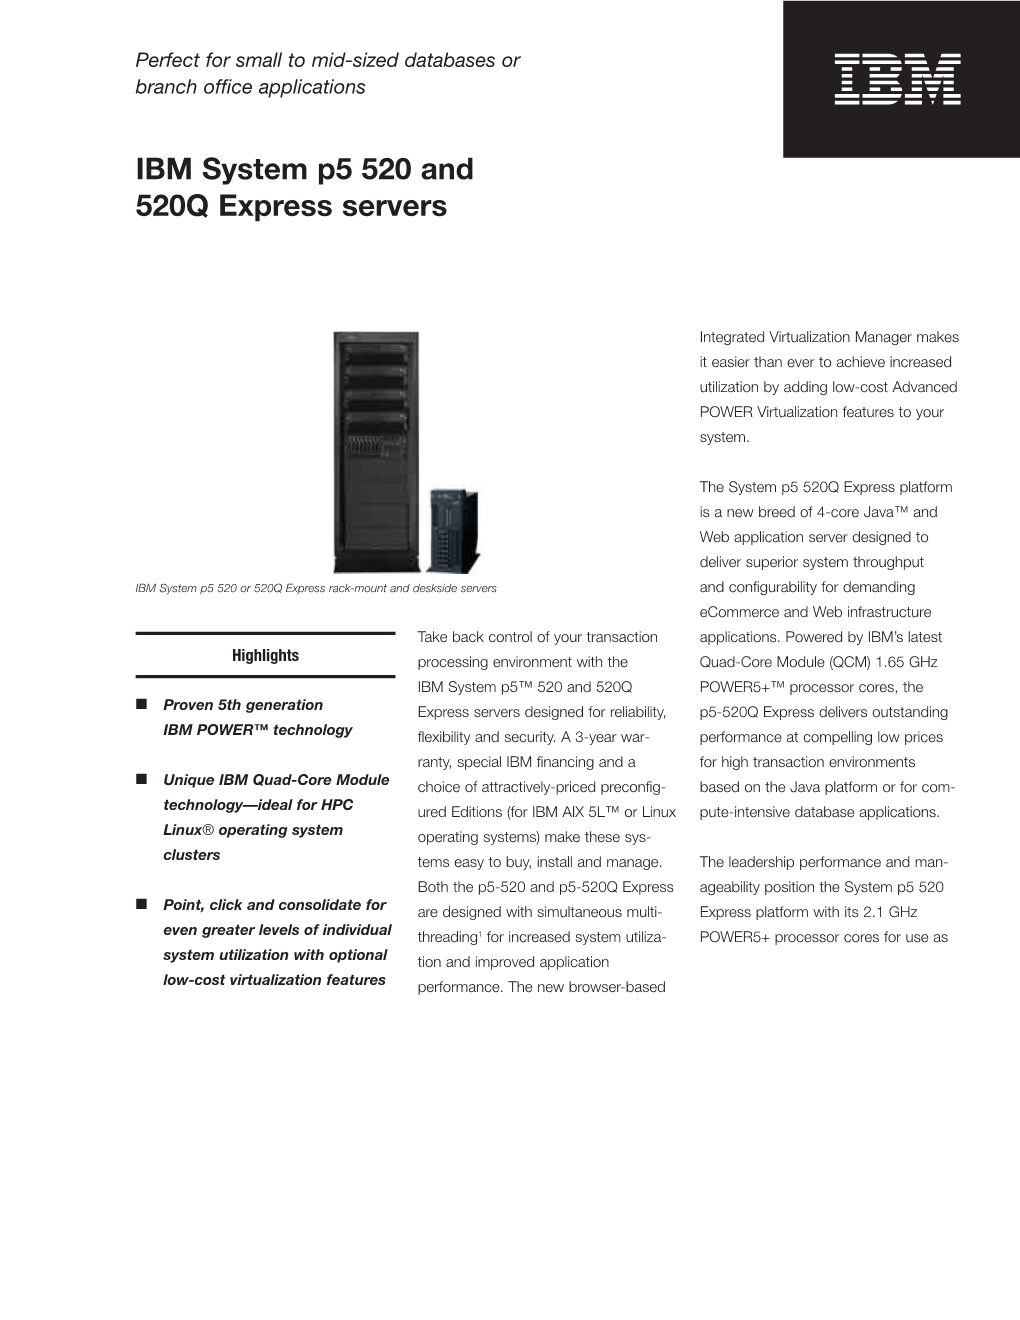 IBM System P5 520 and 520Q Express Servers